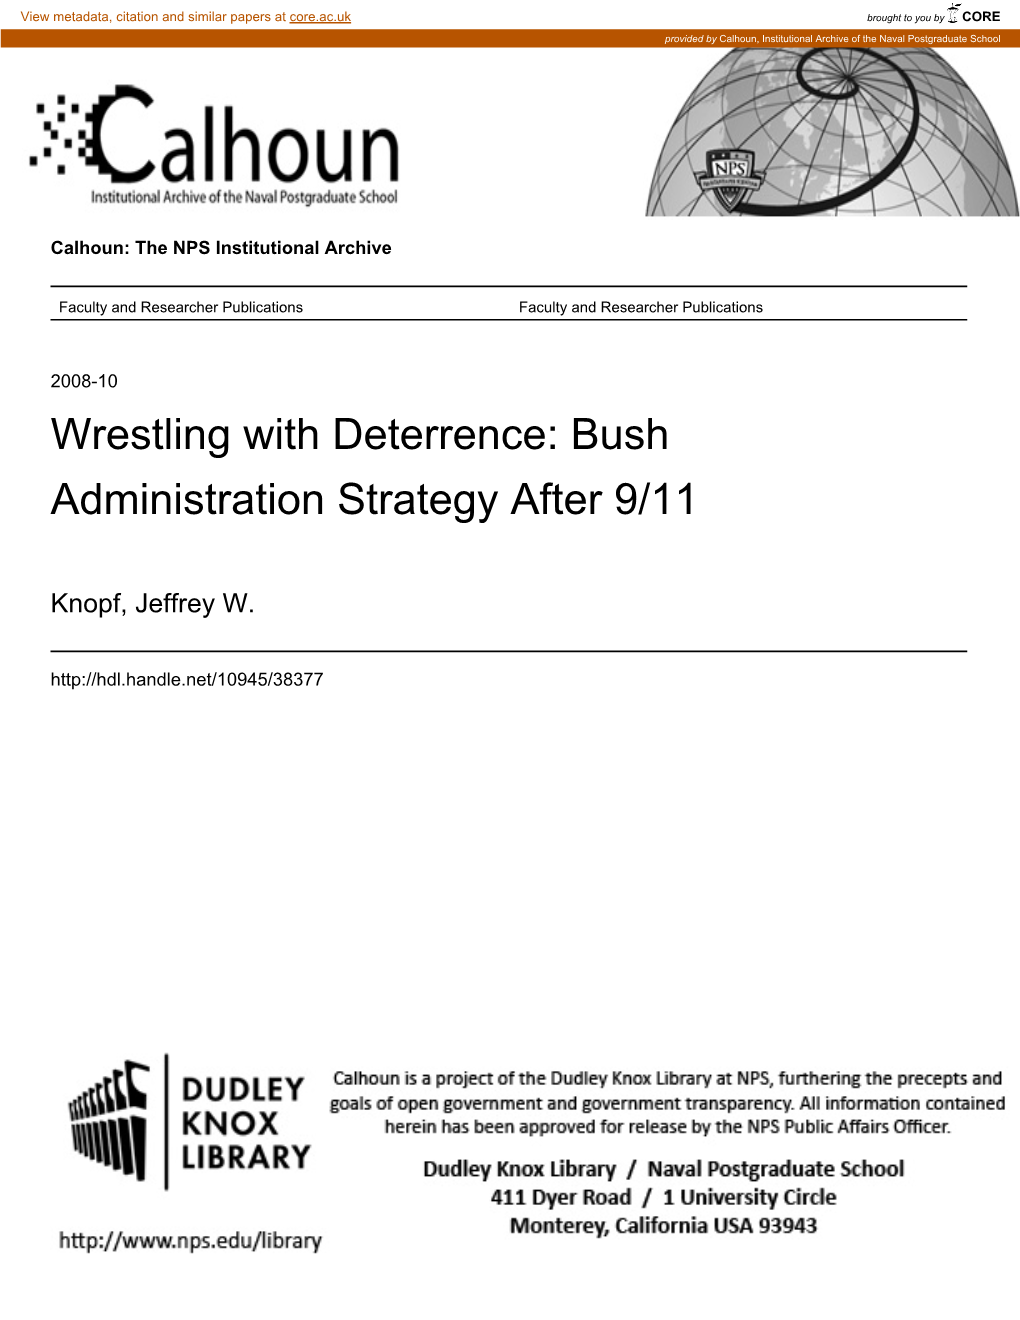 Wrestling with Deterrence: Bush Administration Strategy After 9/11